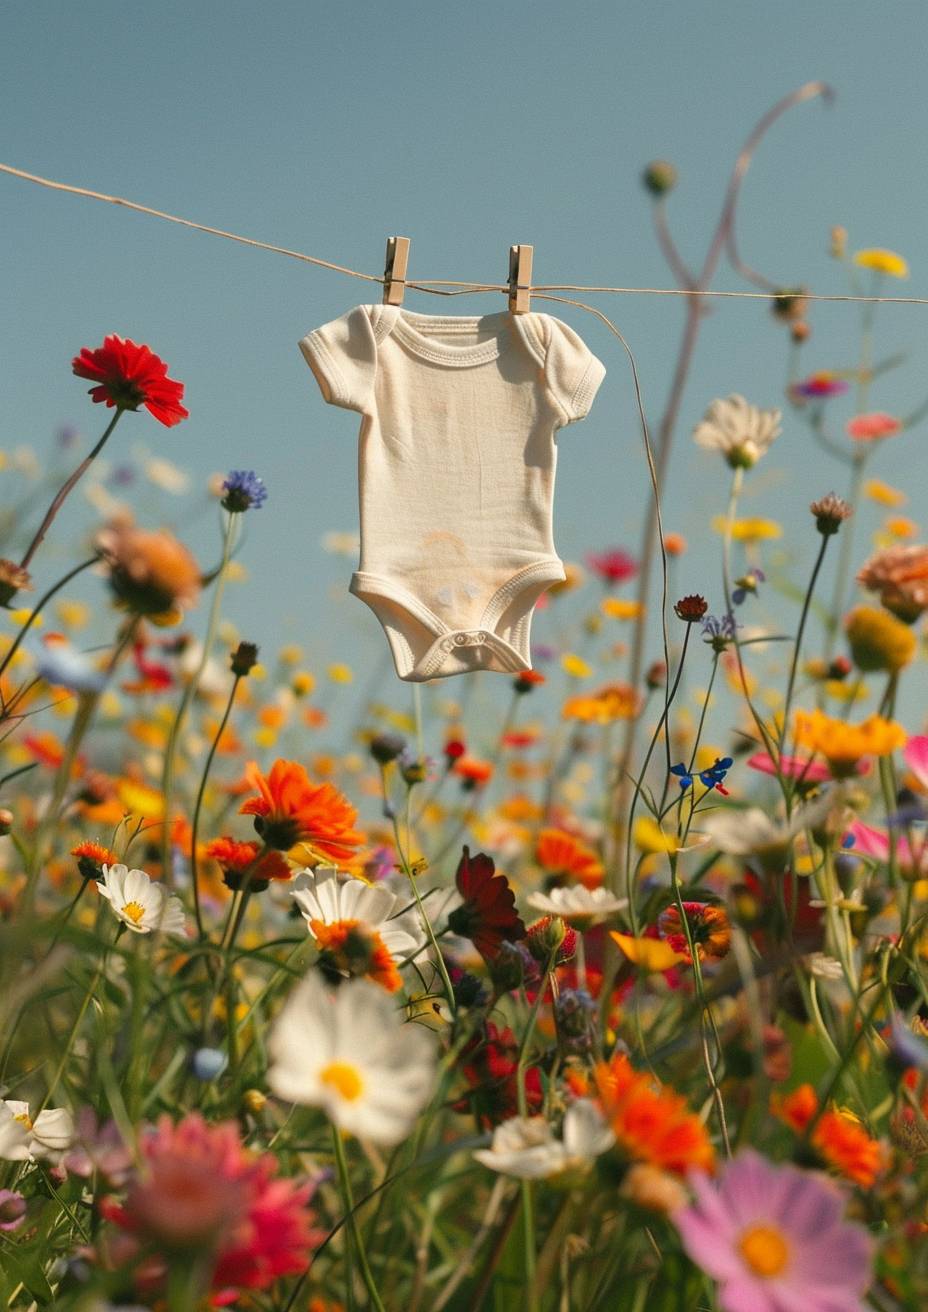 A baby onesie is hung on a string with wooden clips in the middle of a colorful flower field